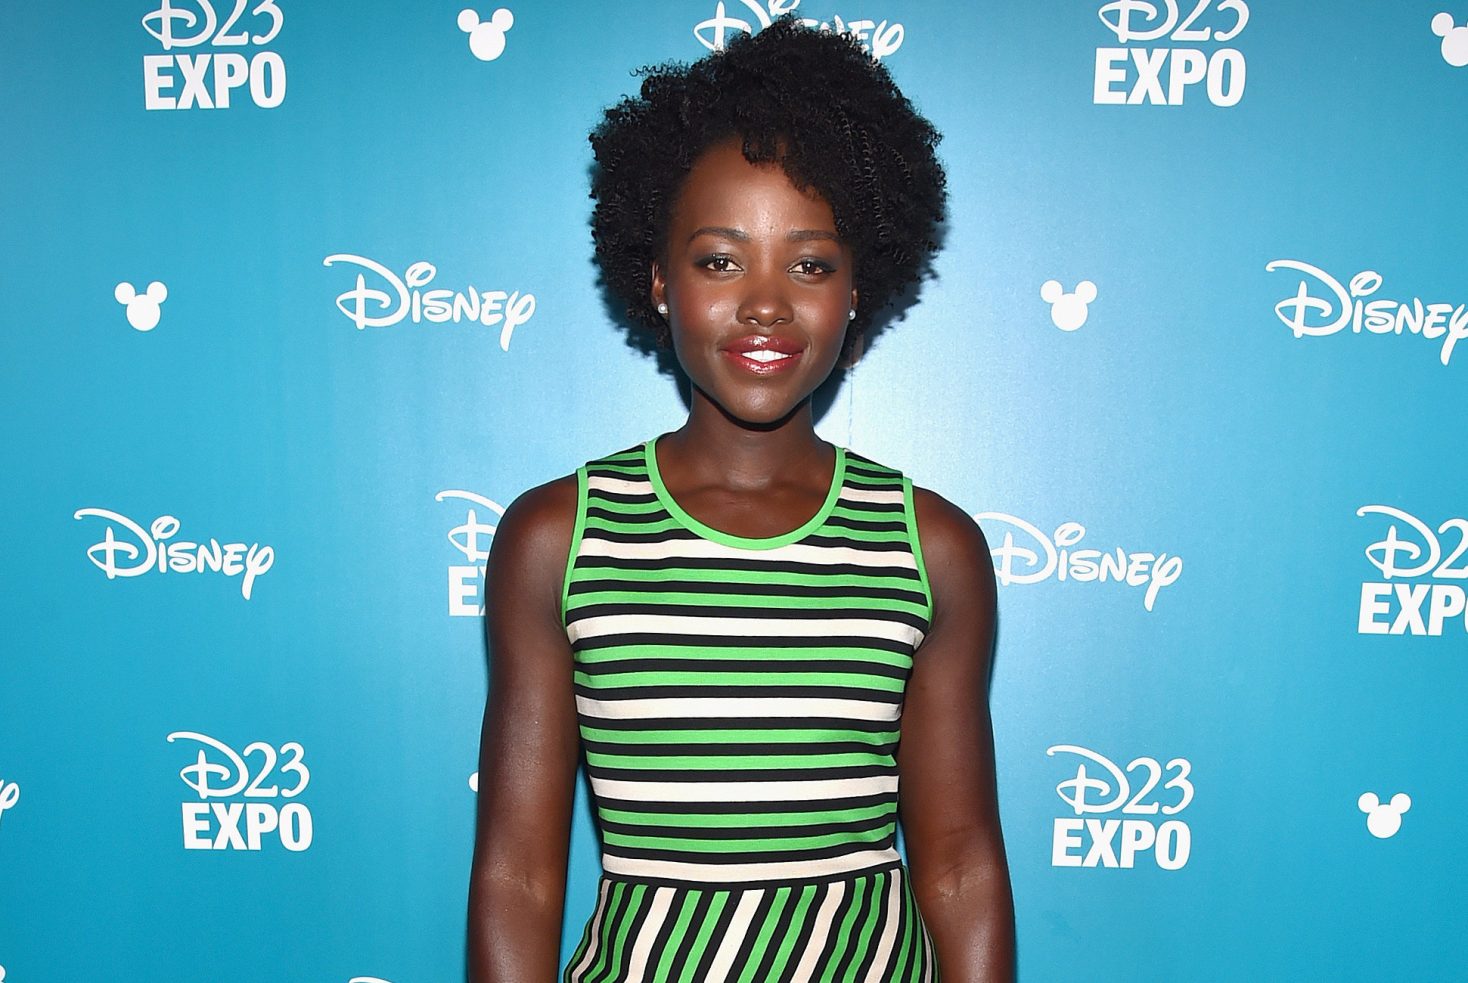 Lupita Nyong'o Now Officially an A-lister, Her Movies Have Grossed Over $3 Billion Worldwide!